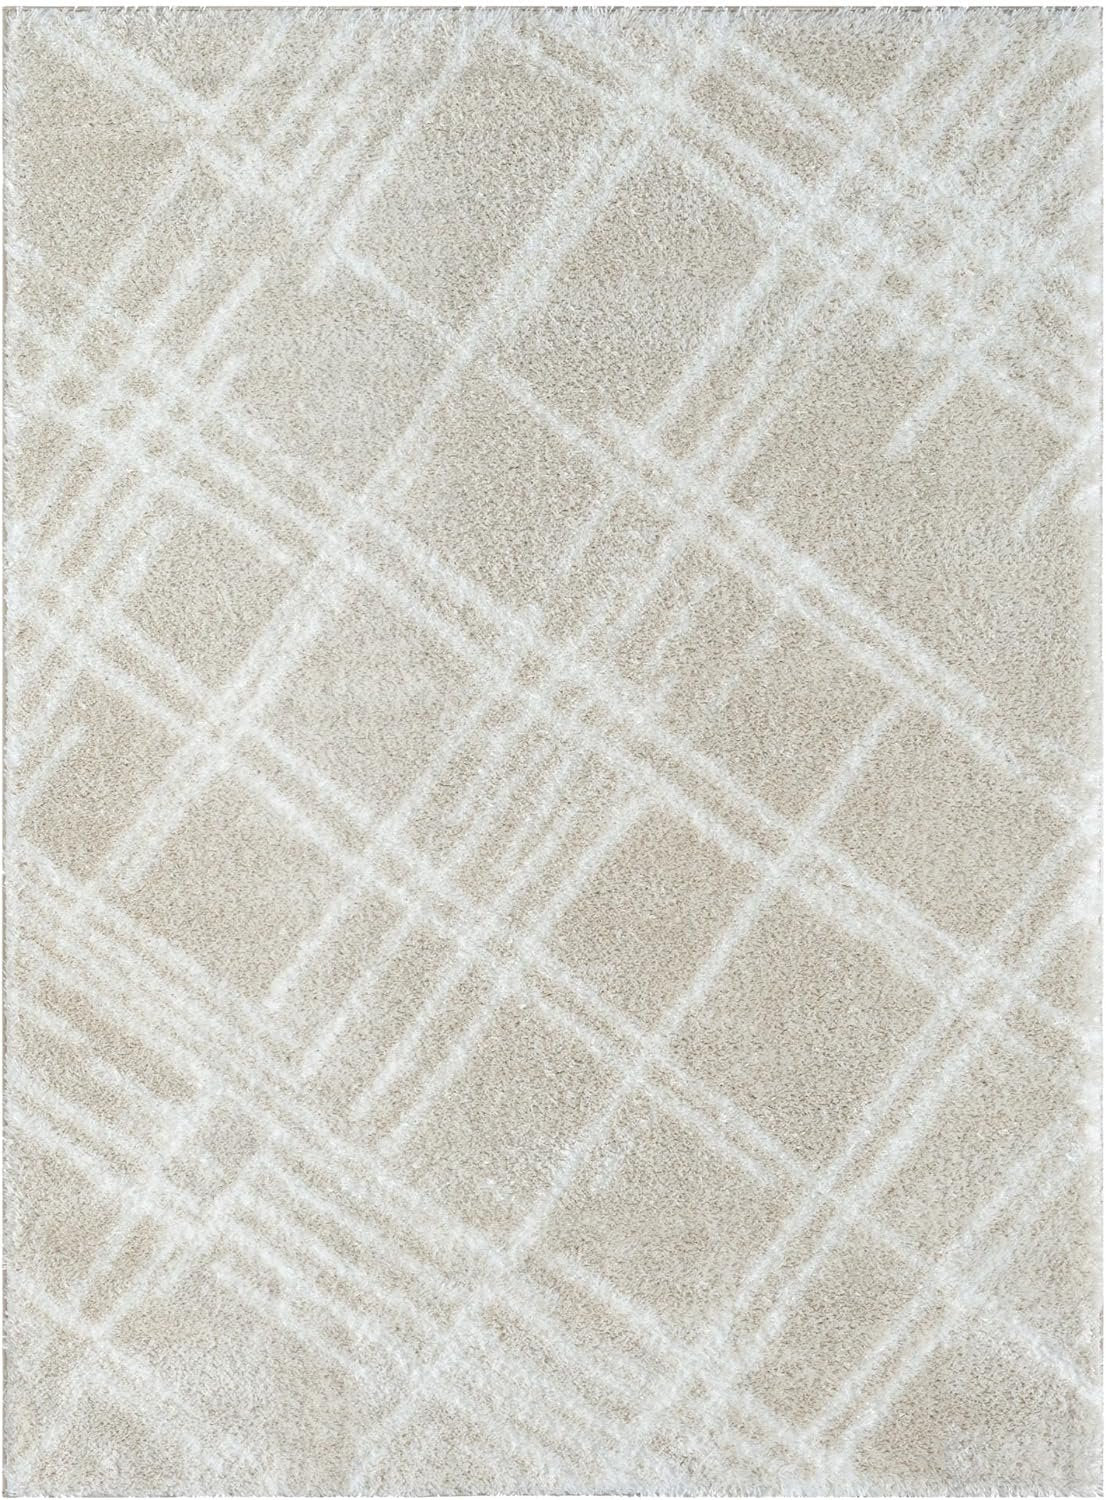 HR Chic Geometric Diamond-Patterned Shag Rug - Plush High-Pile Luxury Area Rug in Neutral Grey and White #26229